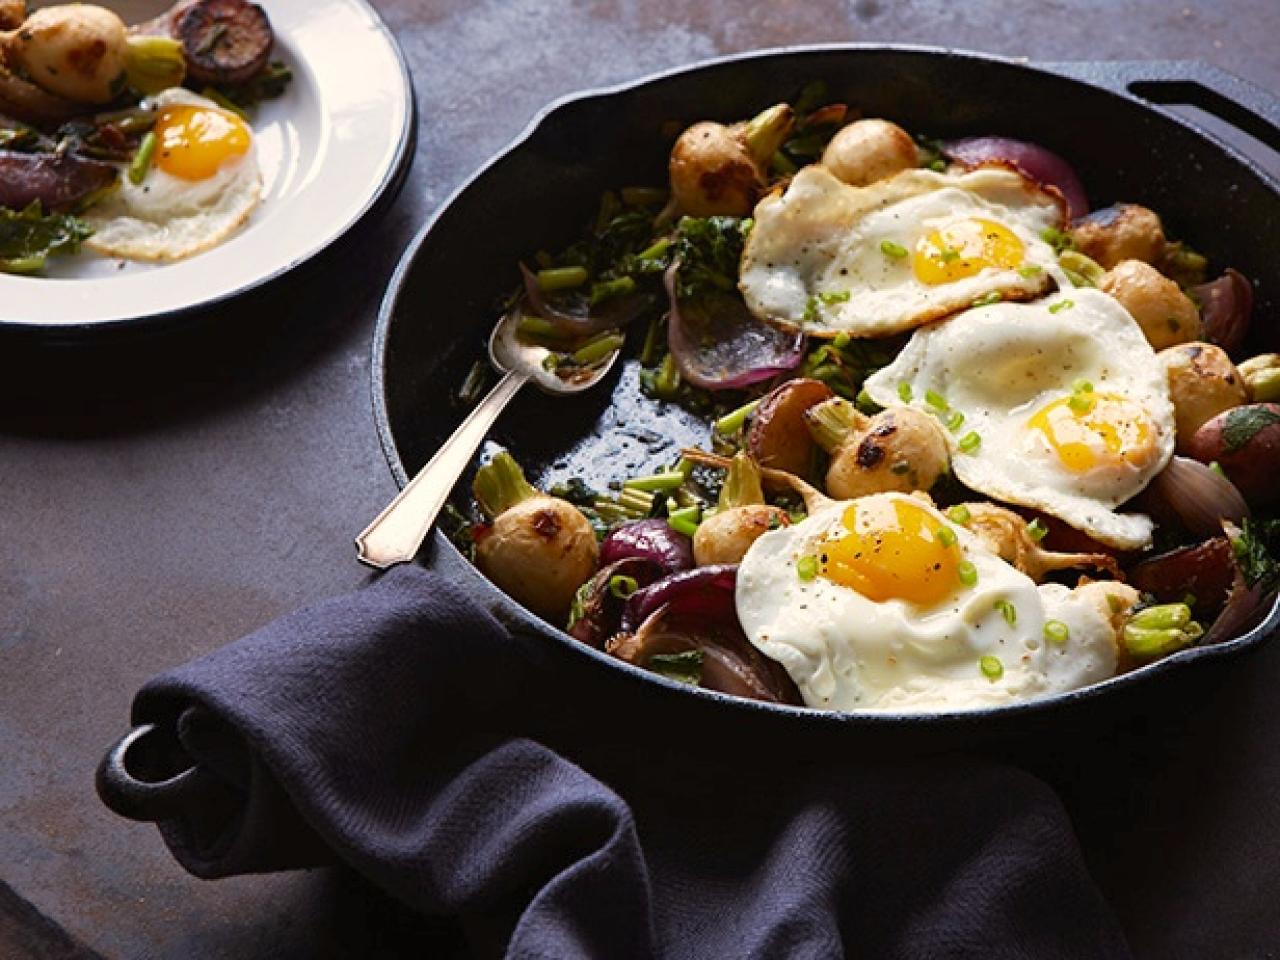 https://food.fnr.sndimg.com/content/dam/images/food/fullset/2013/9/24/0/FN_Chopped-Roasted-Baby-Turnips-with-Miso-and-Eggs_s4x3.jpg.rend.hgtvcom.1280.960.suffix/1383787816104.jpeg